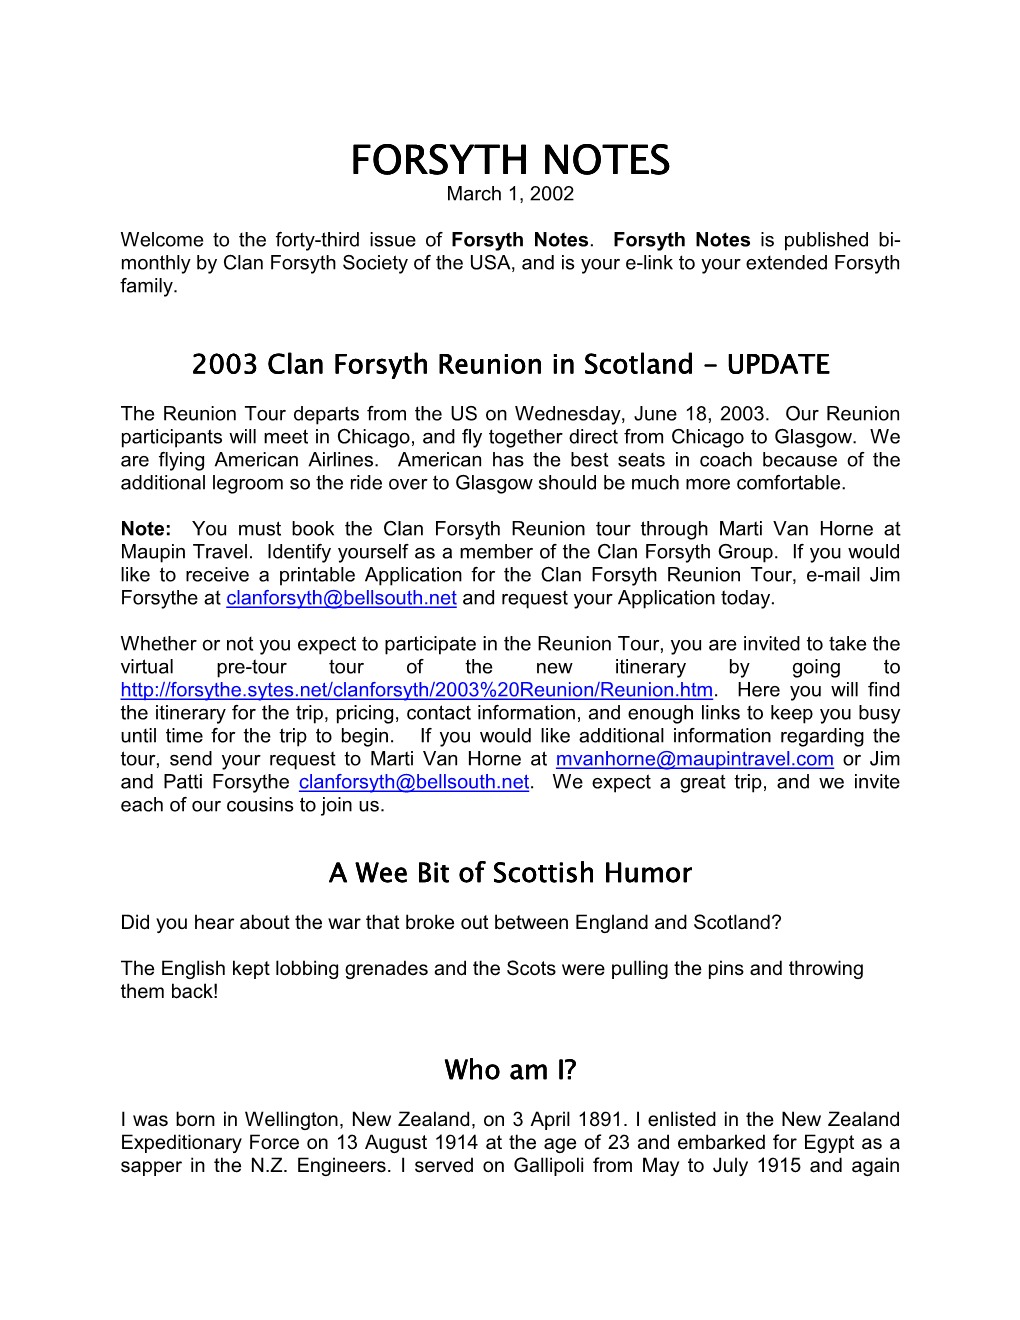 Forsyth Notes, Issue43